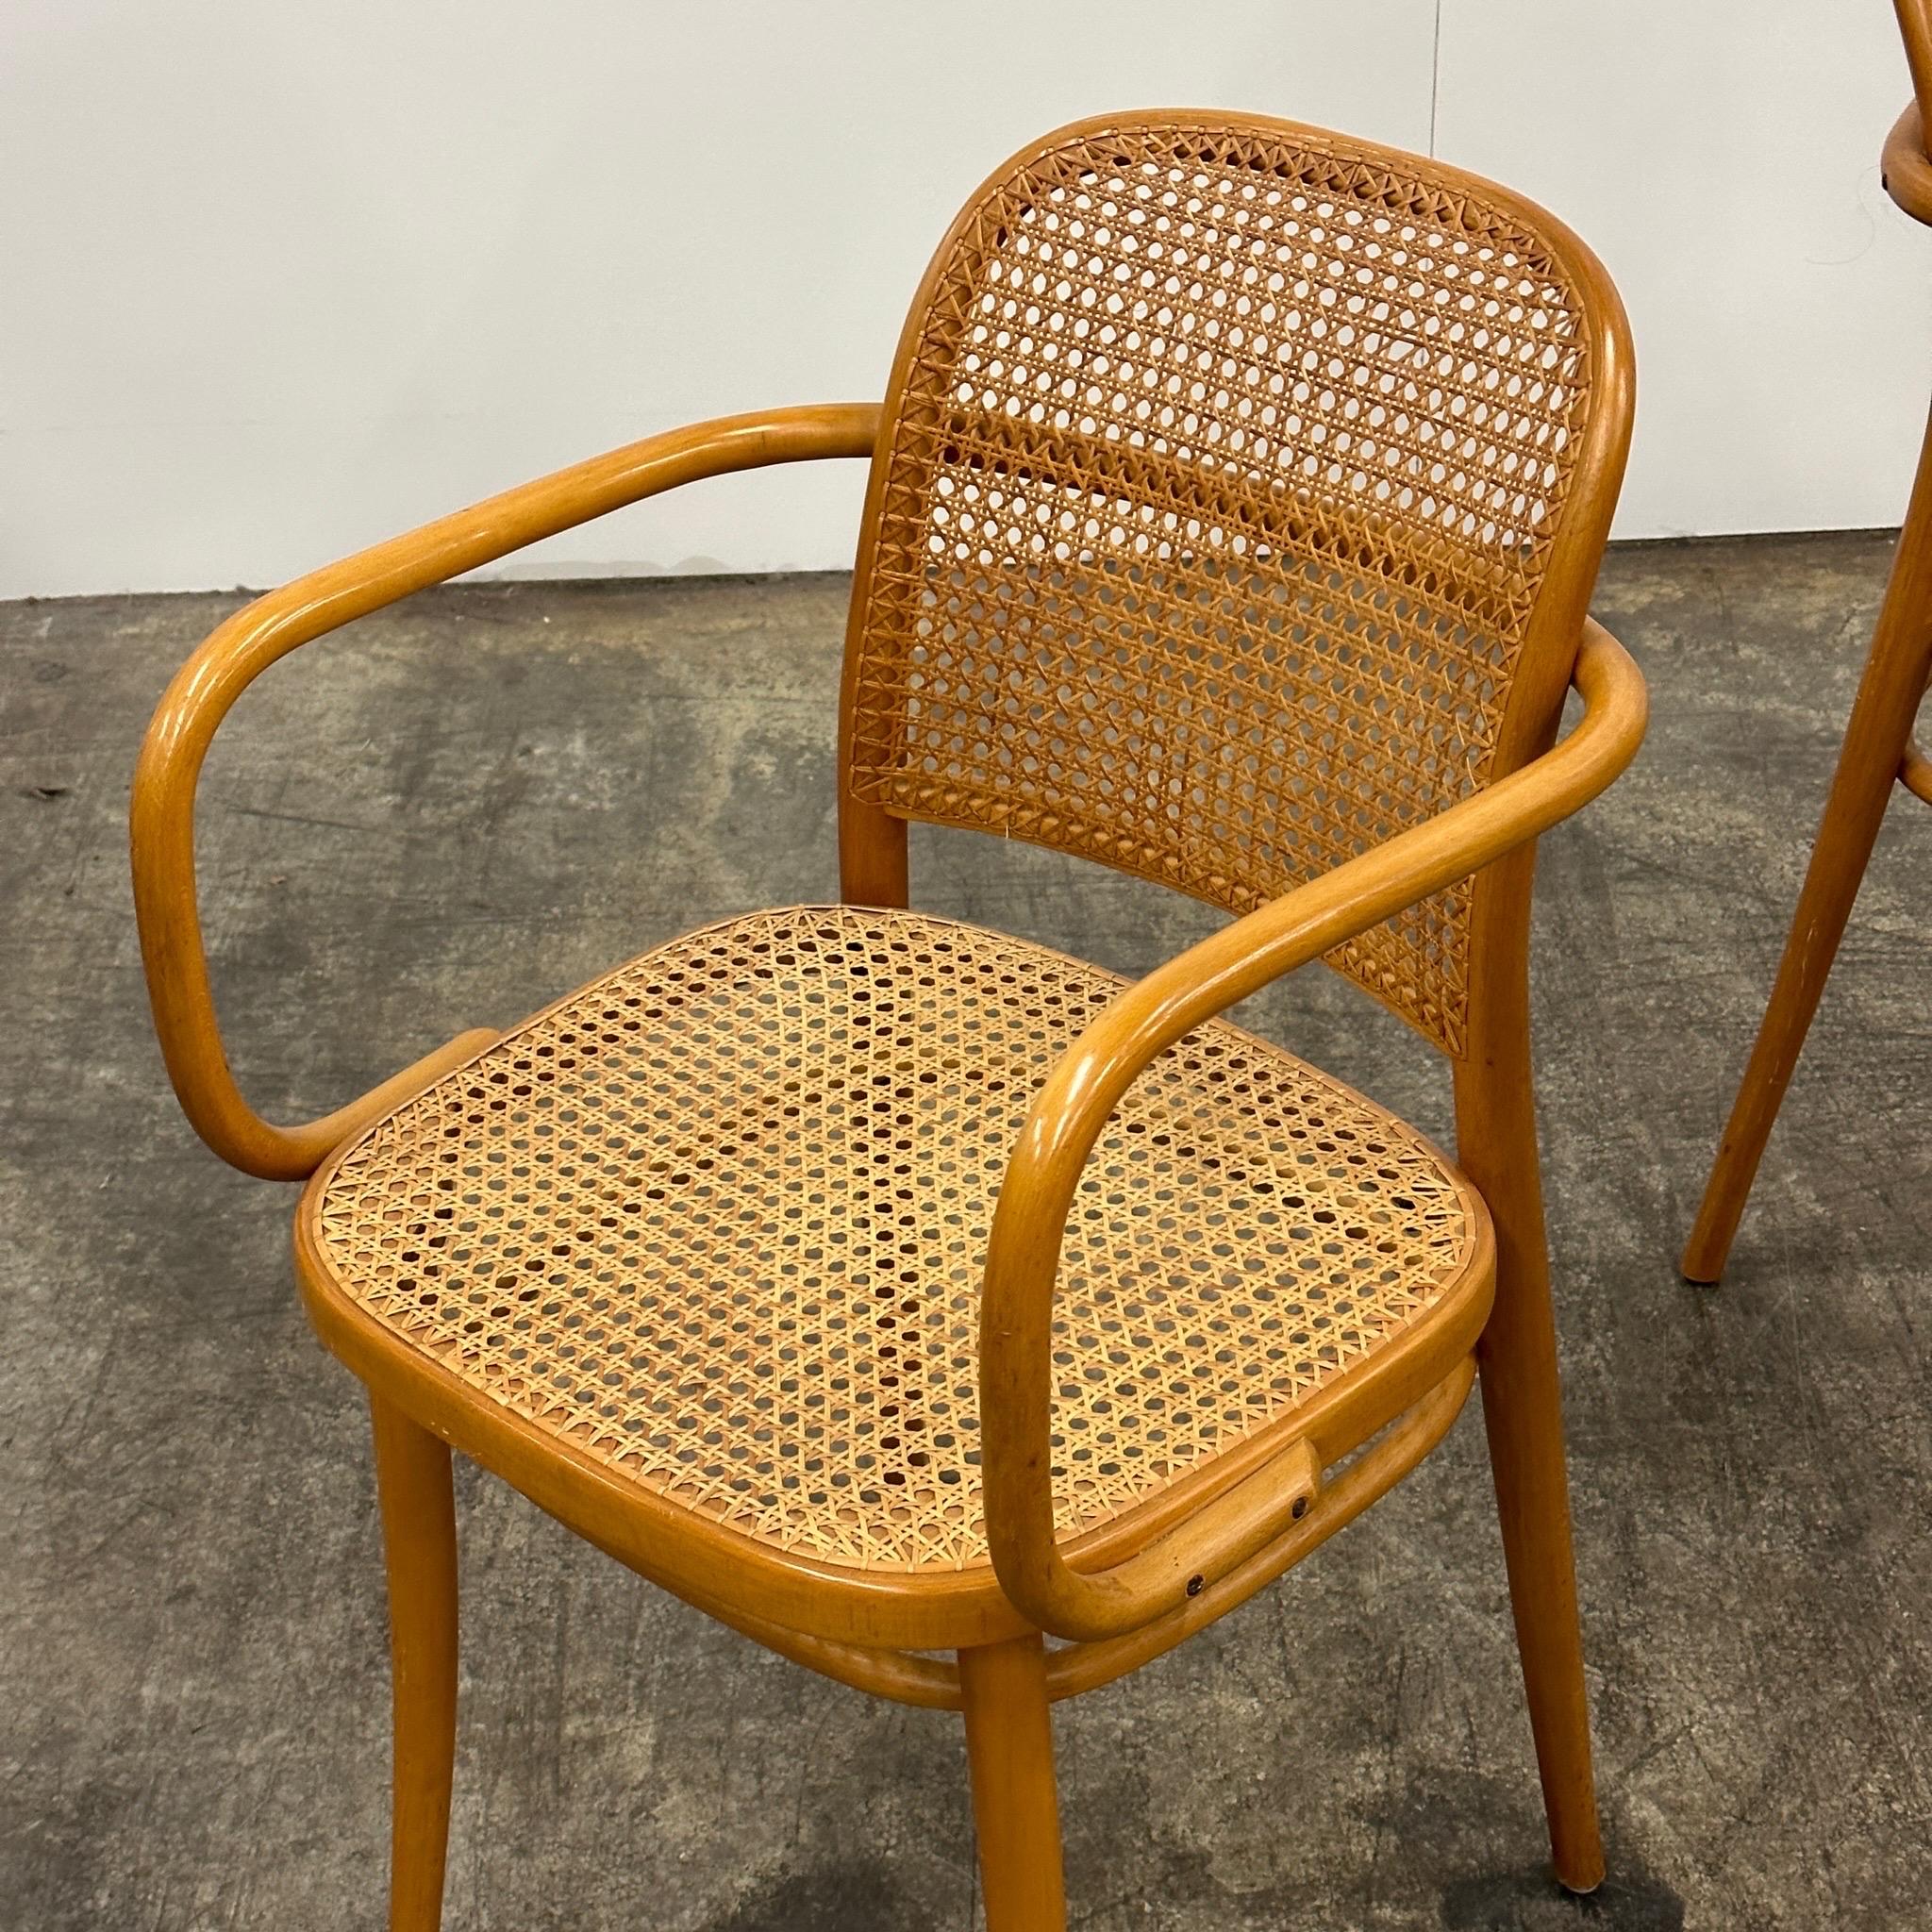 c. 1970s. Price is for the set. Contact us if you’d like to purchase a single item. Designed by Josef Hoffman for Thonet, produced by Ligna. Made in Czechoslovakia. 